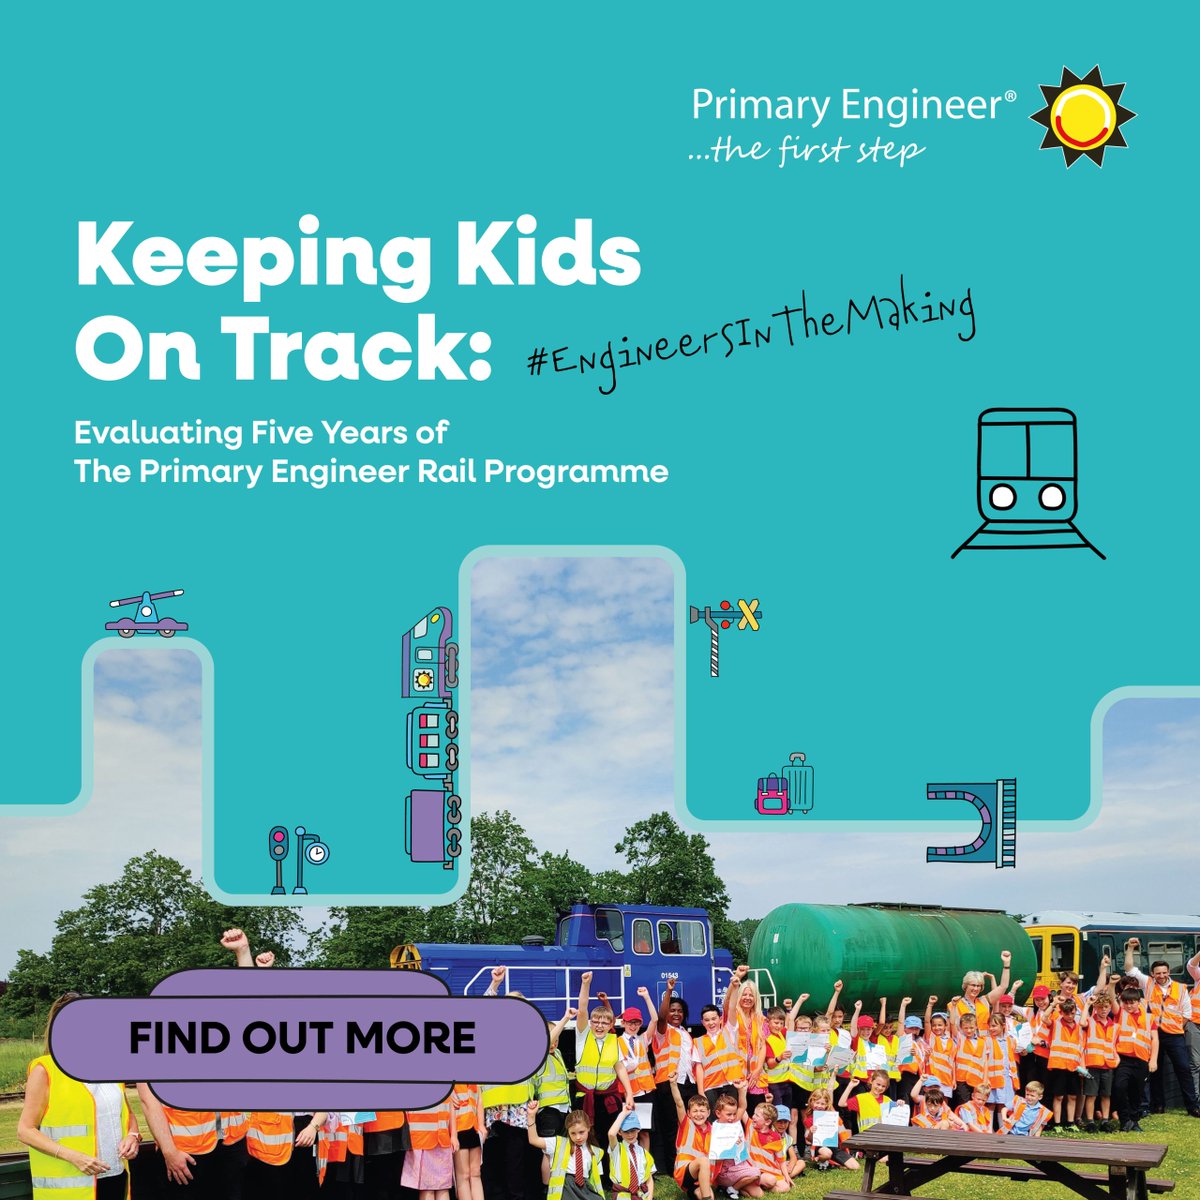 We are a proud partner of @primaryengineer who have been bringing rail into classrooms around the UK with their Rail Programme for 5 years! Their new report looks at the impact this programme has had on pupils, teachers and the engineers. primaryengineer.com/keeping-kids-o…